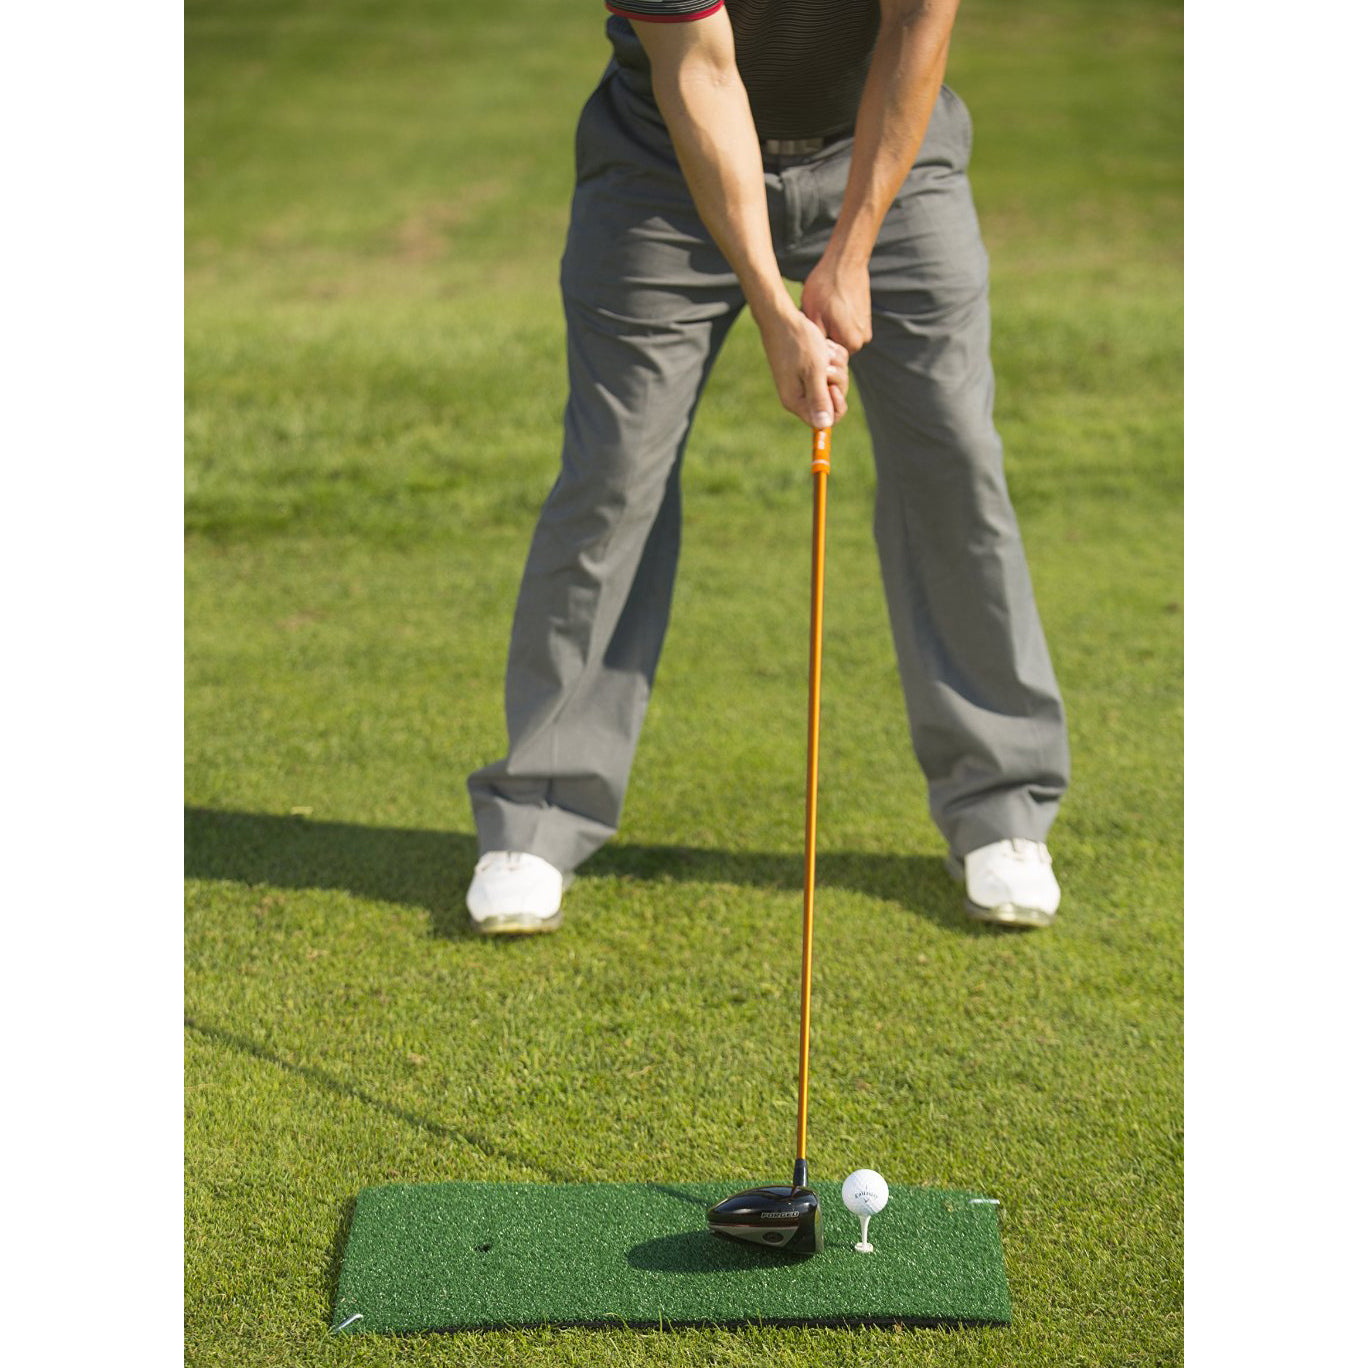 IZZO 1' x 2' Chipping and Driving Practice Golf Mat IZZO Golf